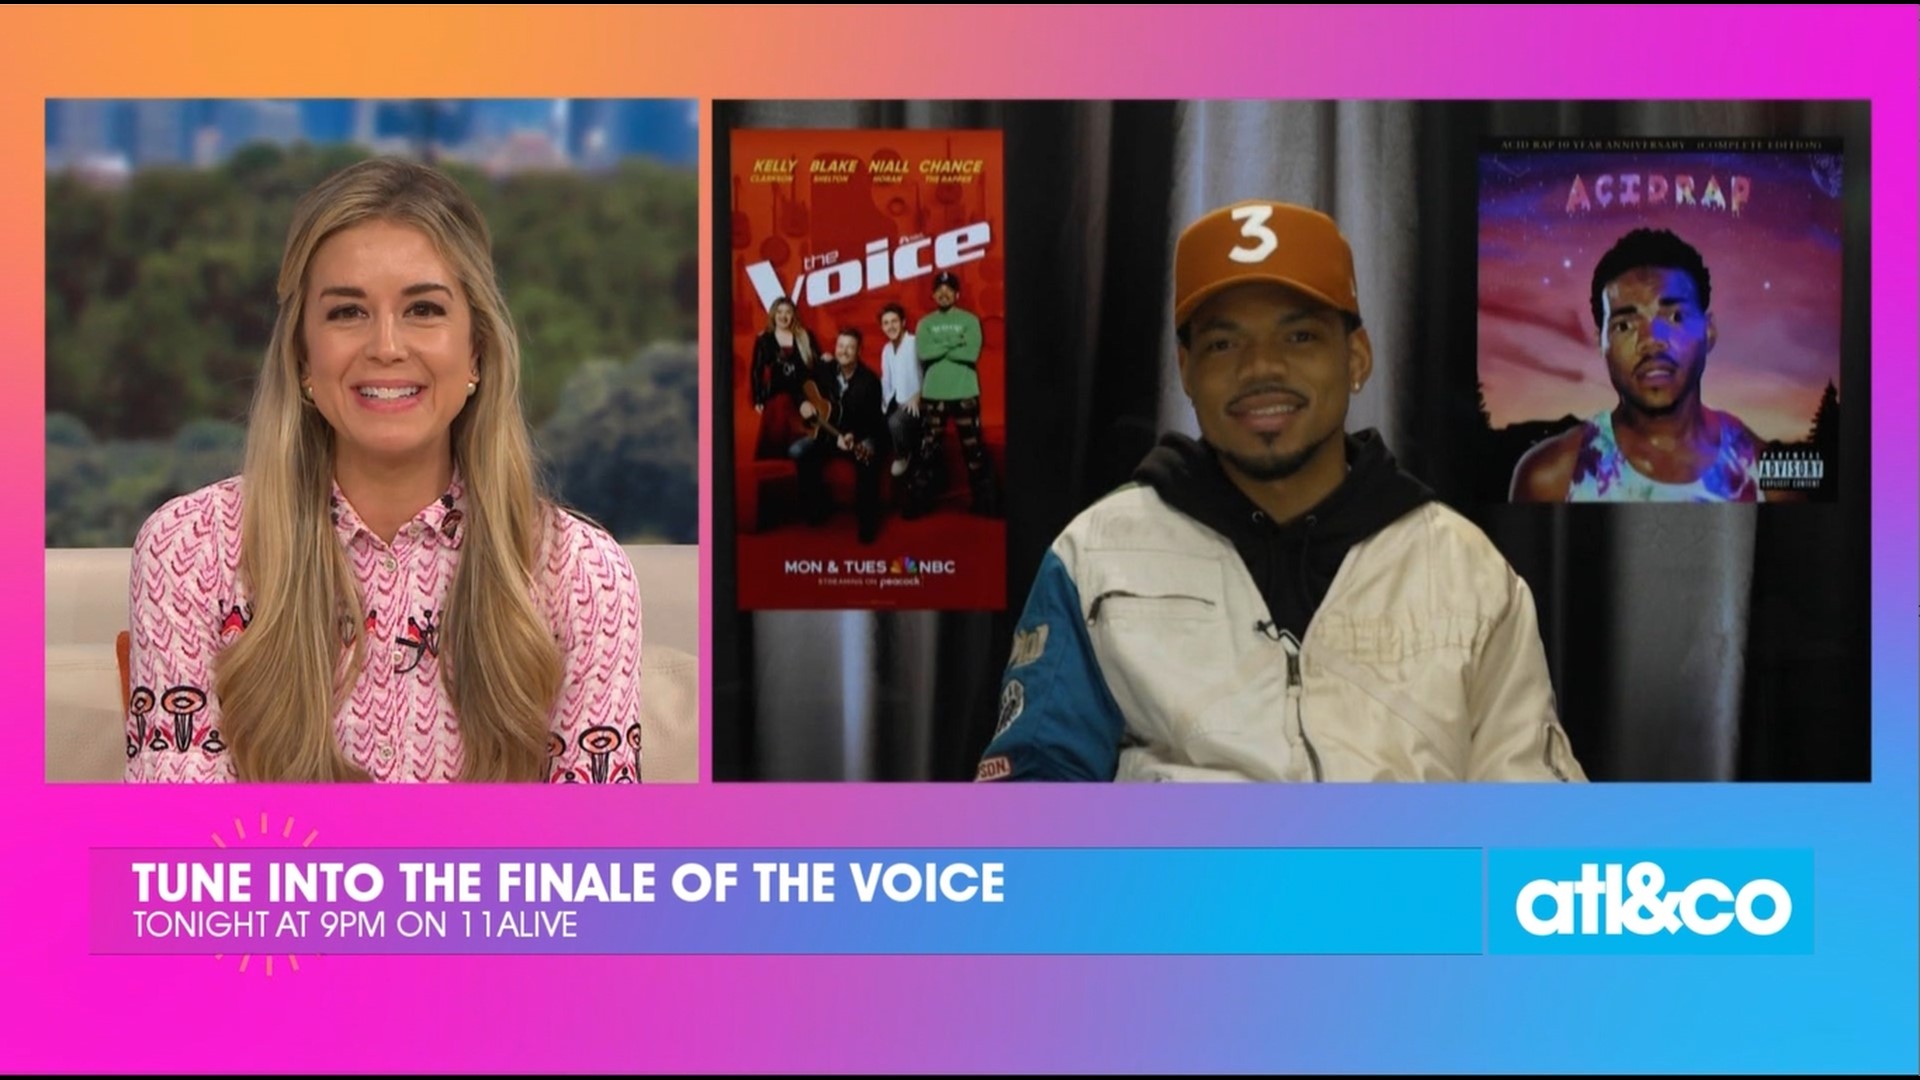 Chance the Rapper talks about this season of 'The Voice' ahead of tonight's star-studded finale (and Blake Shelton's goodbye!) on 11Alive.